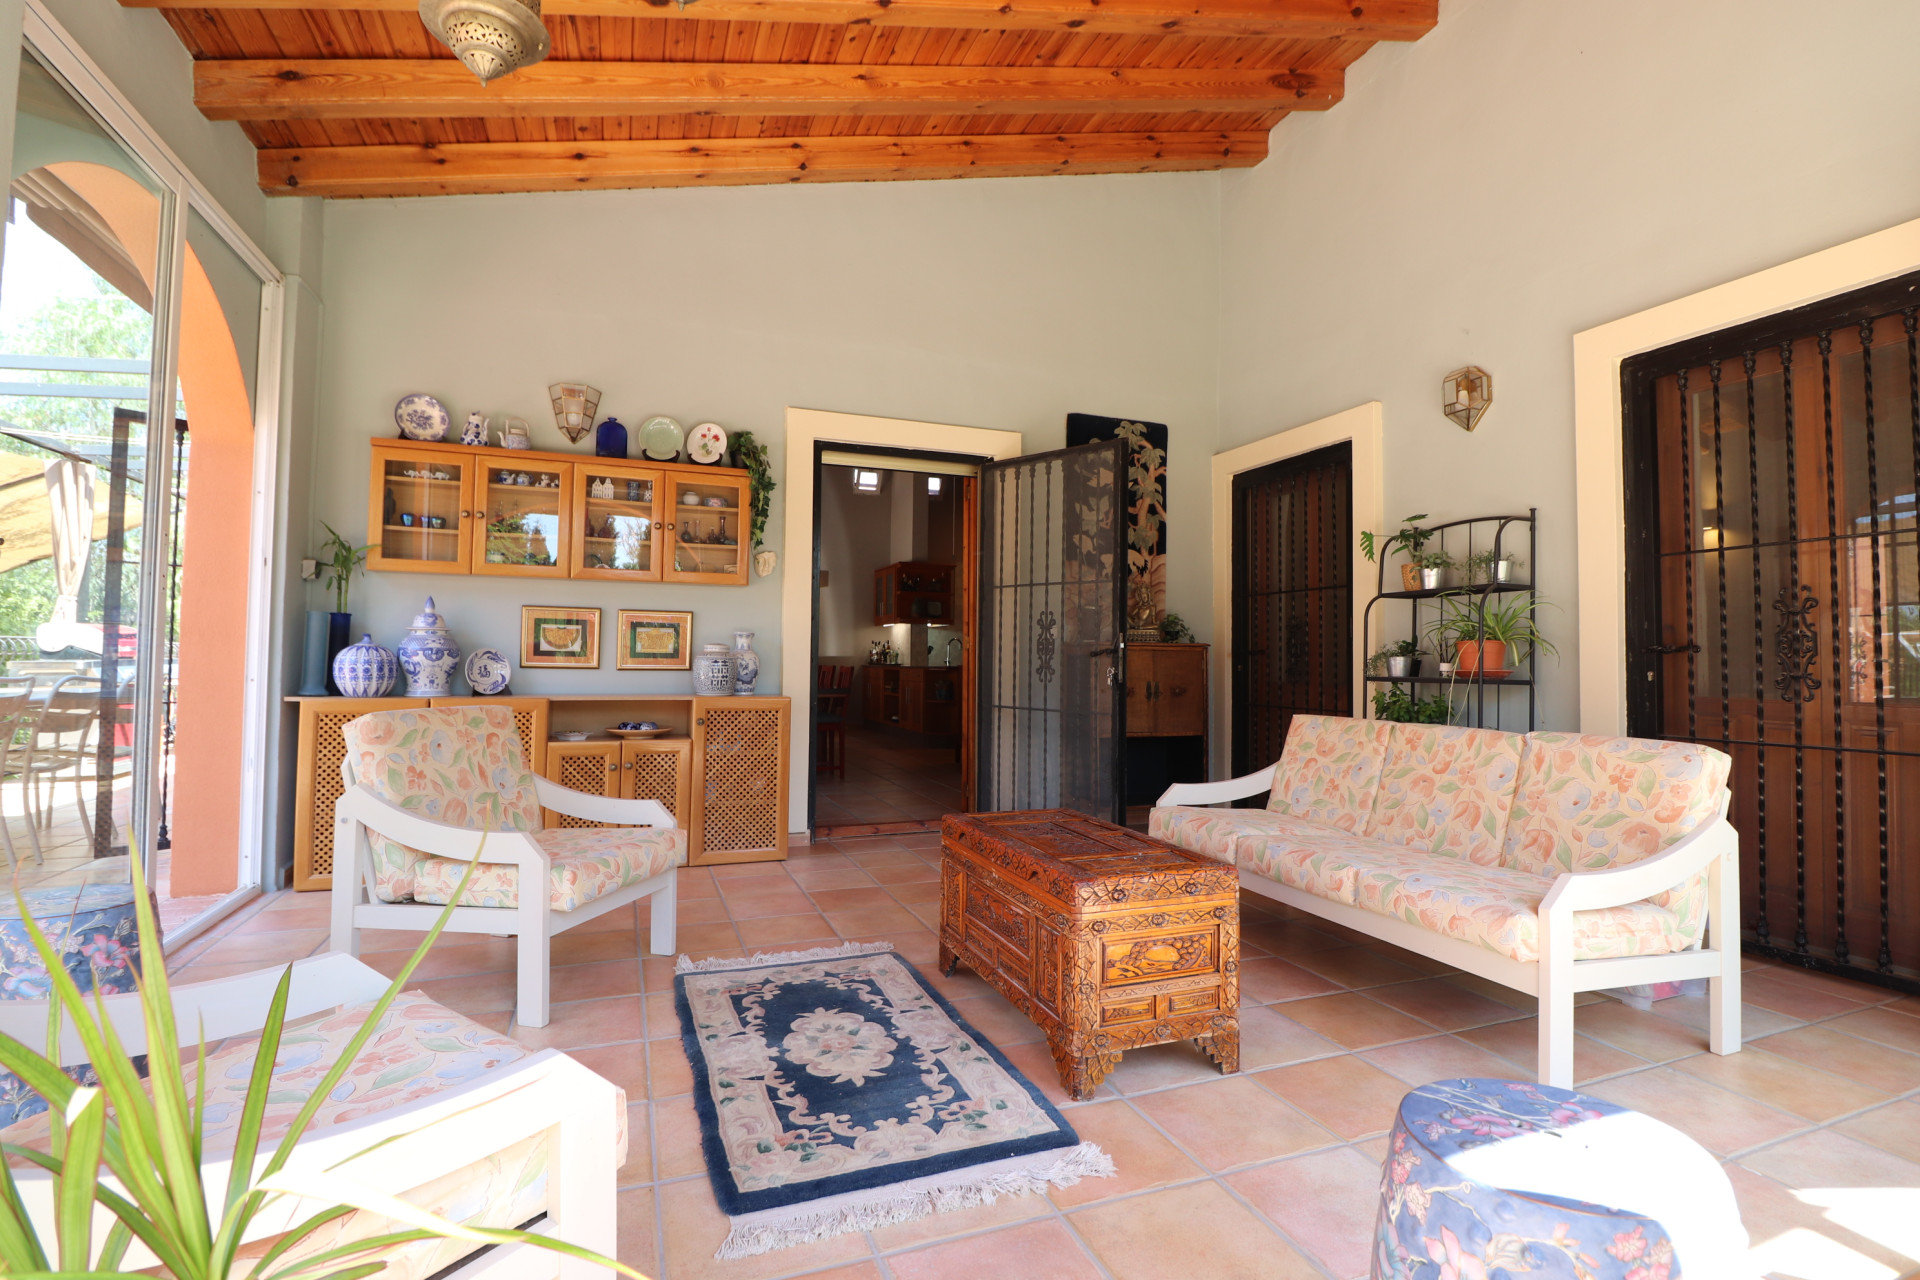 Revente - Country Property - Catral - Catral - Country